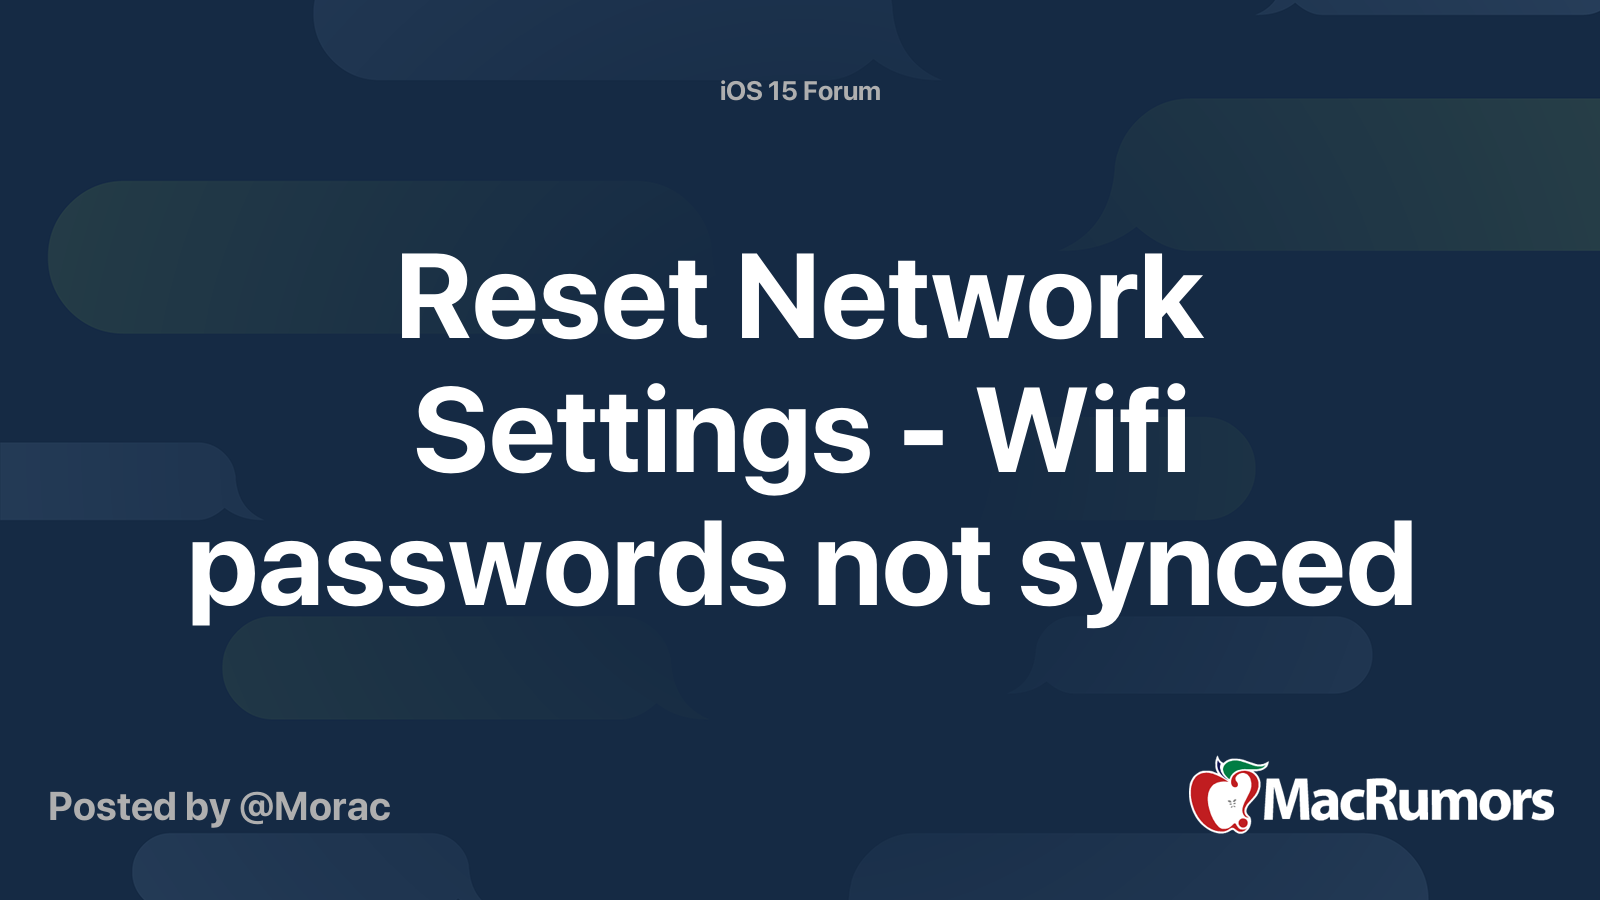 Reset Network Settings - Wifi passwords not synced